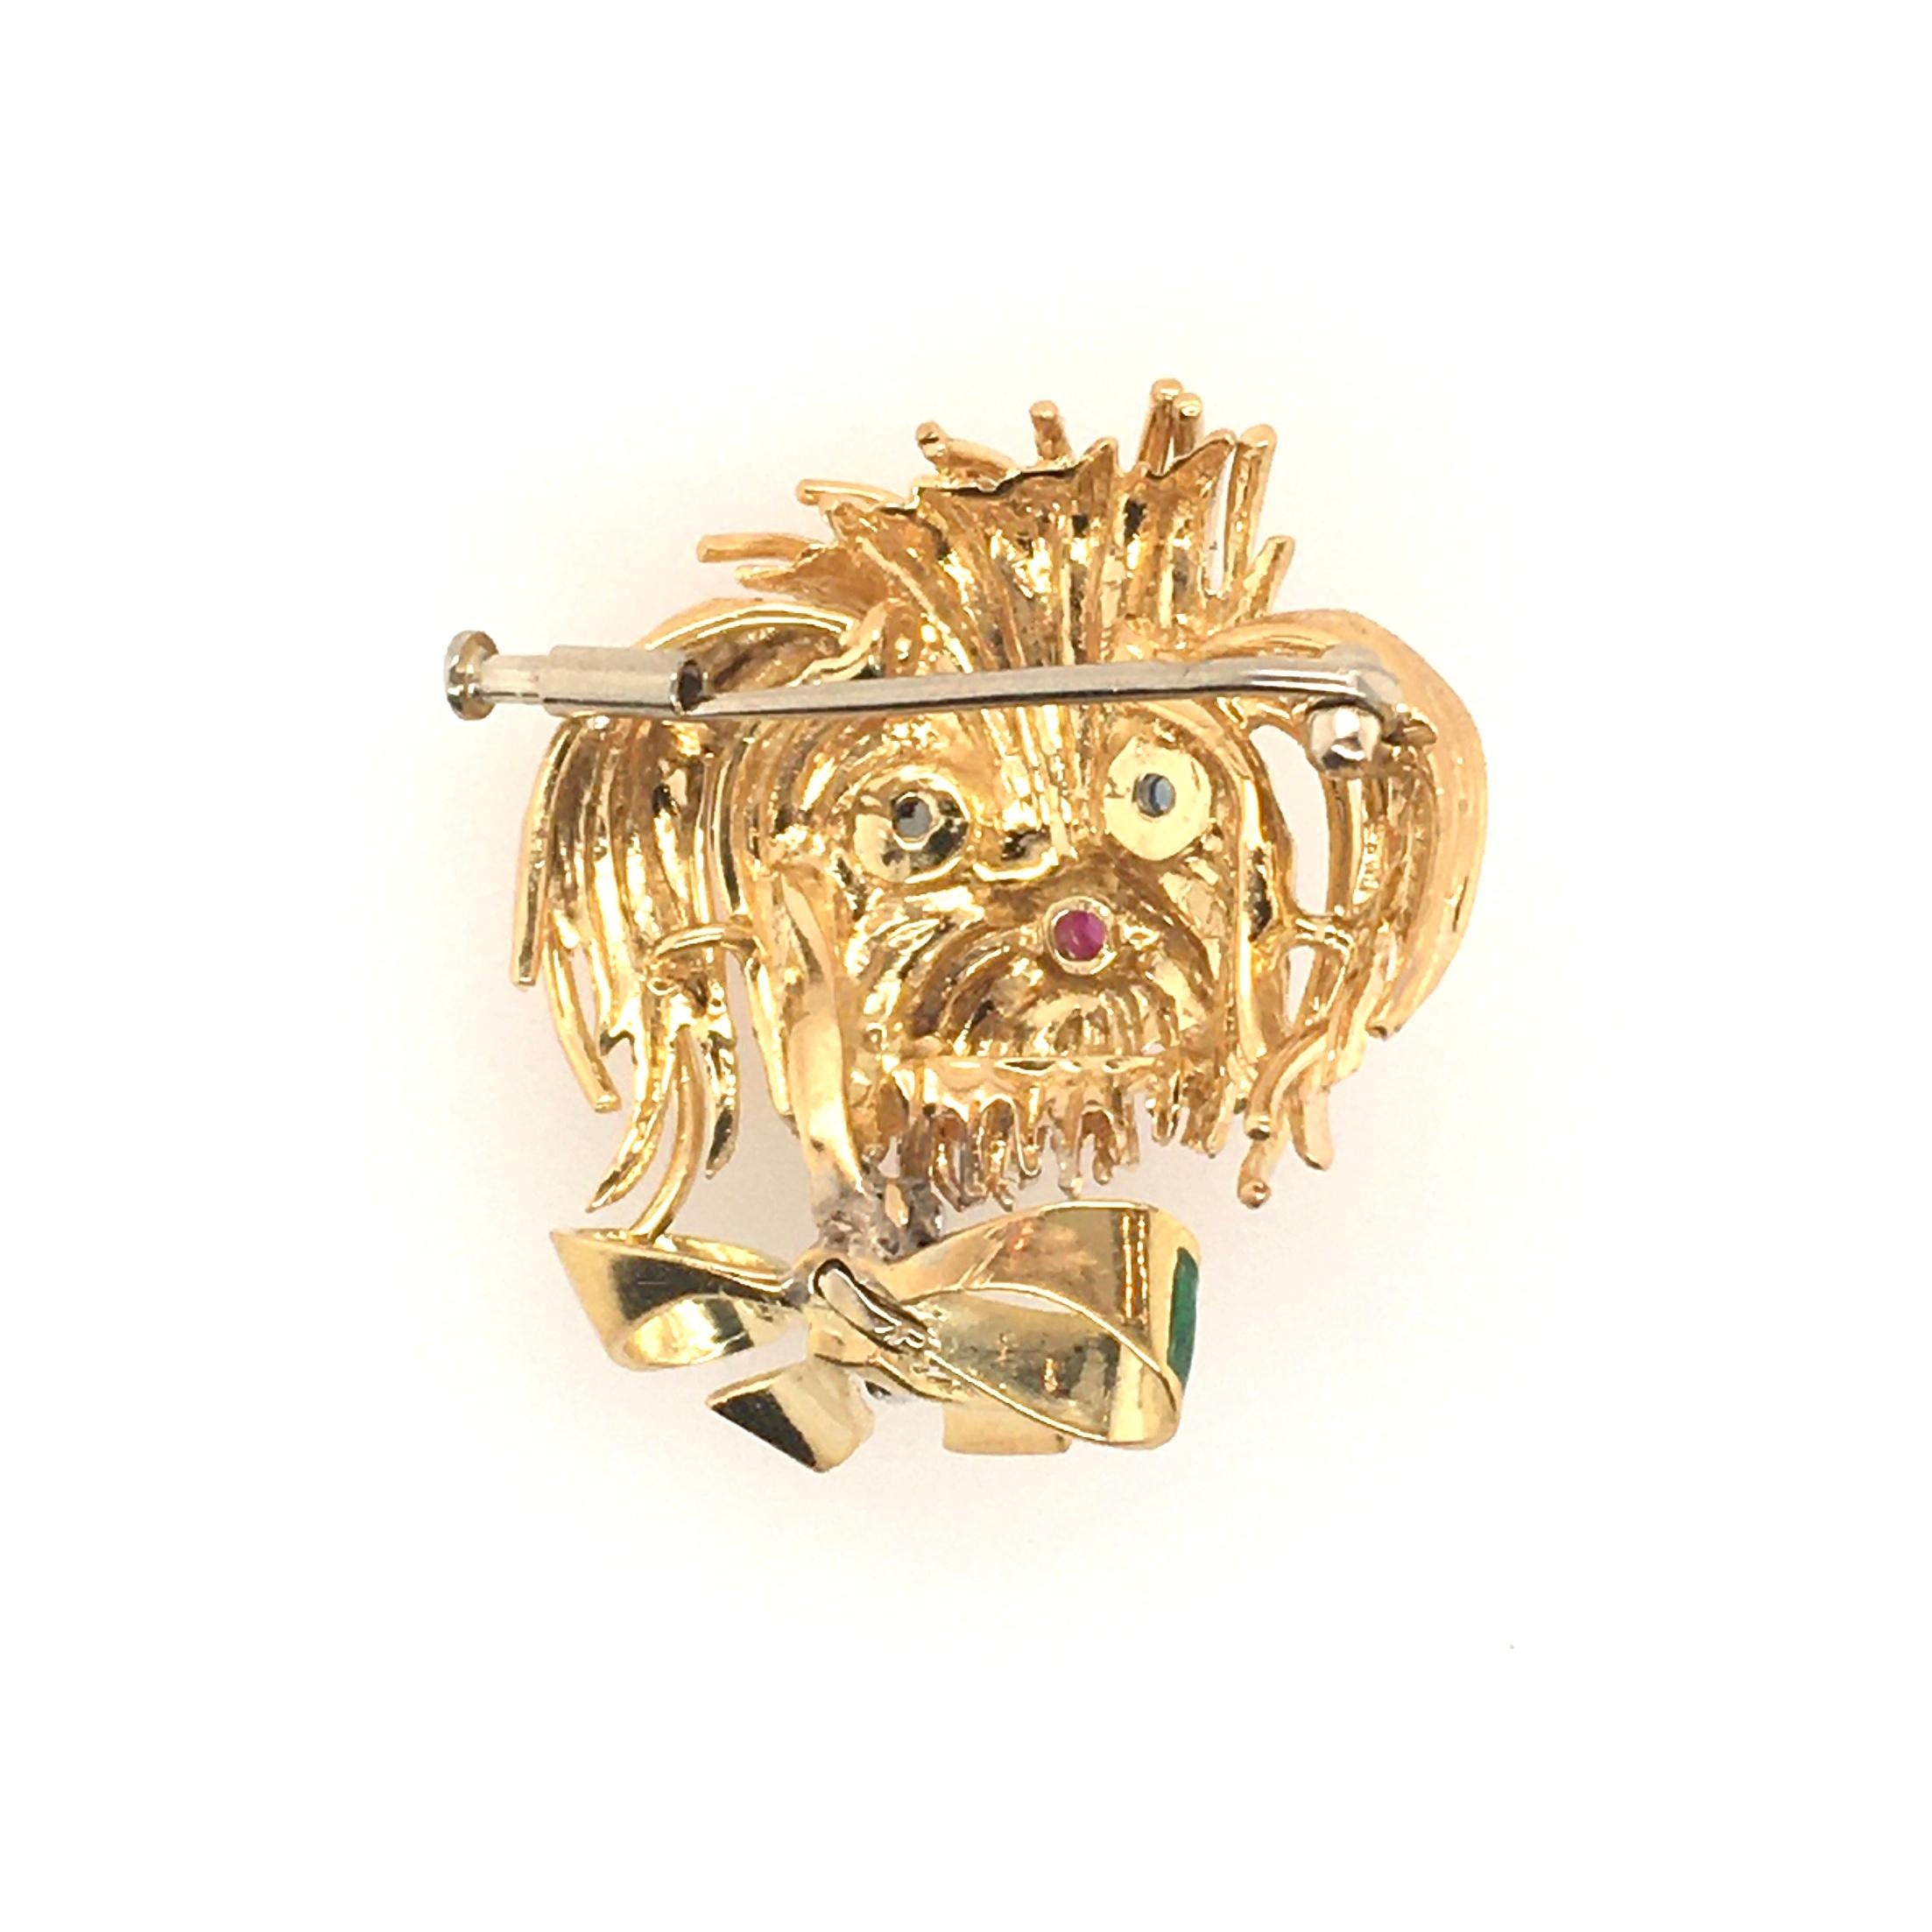 An 18 karat yellow gold, gemstone and enamel brooch. Designed as the head of a stylized Shih Tzu, with cabochon sapphire eyes and ruby nose, enhanced by a green enamel bow. Length is approximately 1 1/4 inches. Gross weight is approximately 11.3